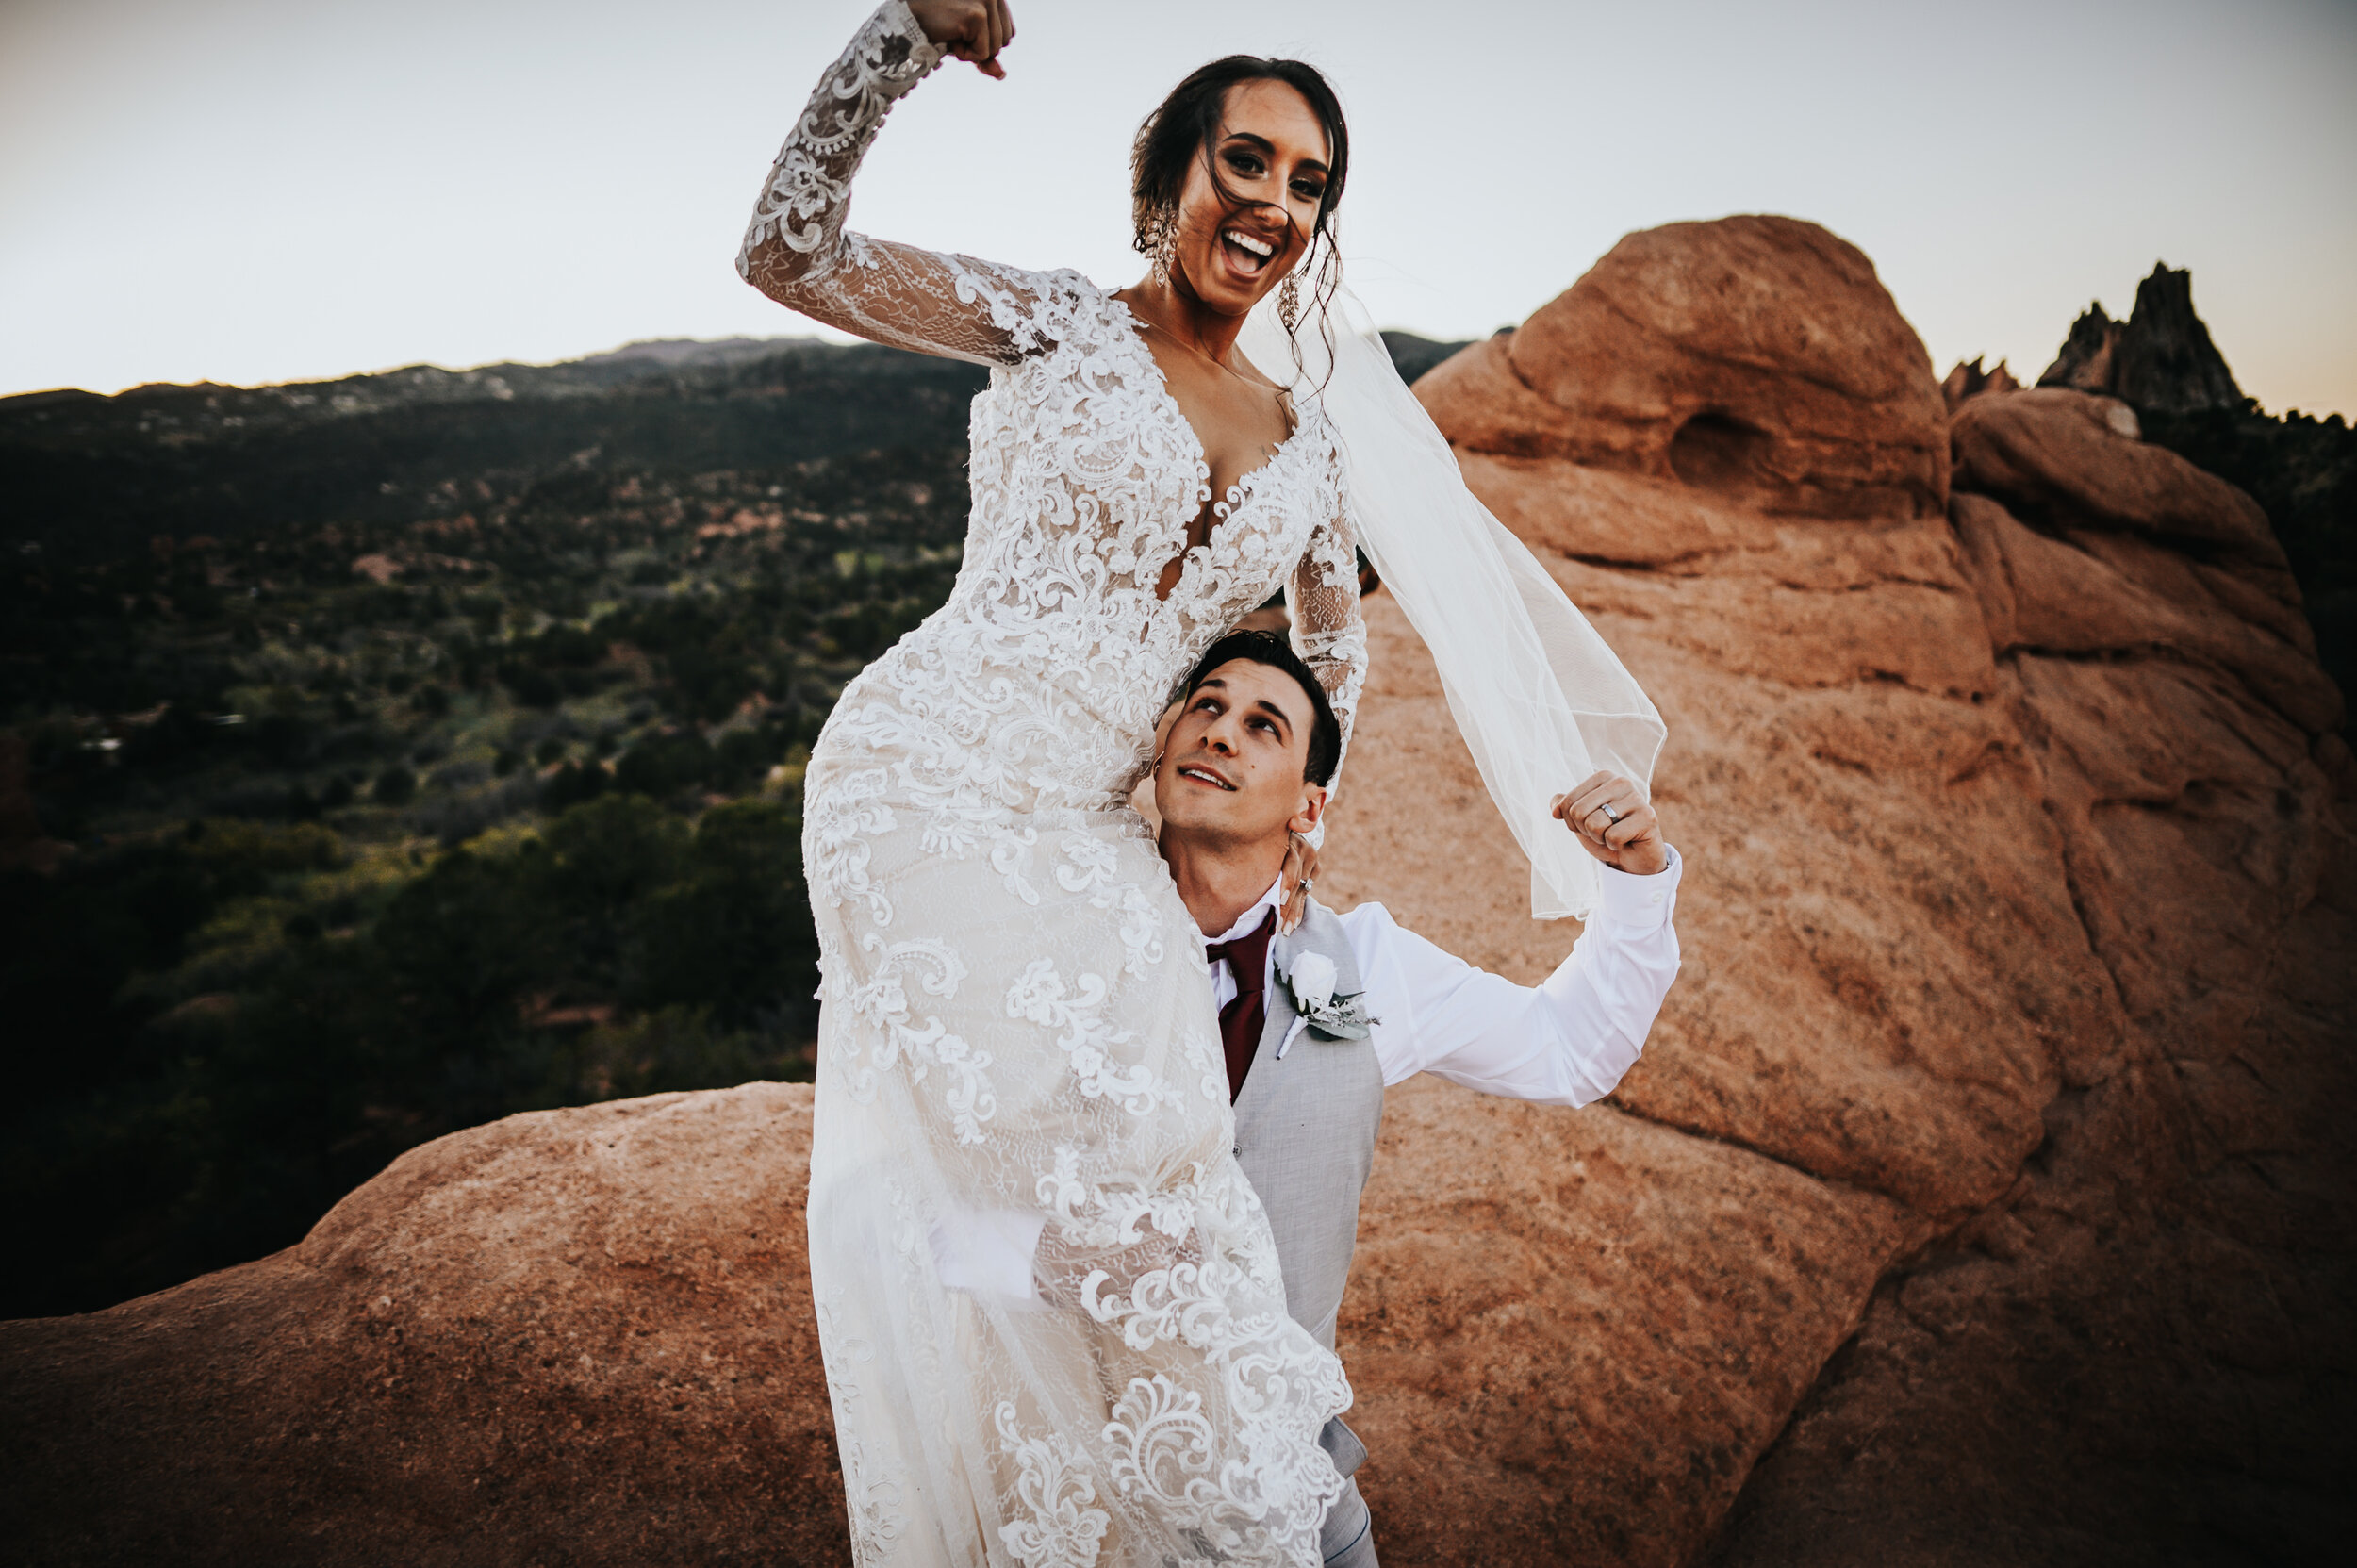 Kenzie and Kody Elopement Colorado Springs Sunset The Pinery at the Hill Garden of the Gods Wild Prairie Photography-40-2020.jpg